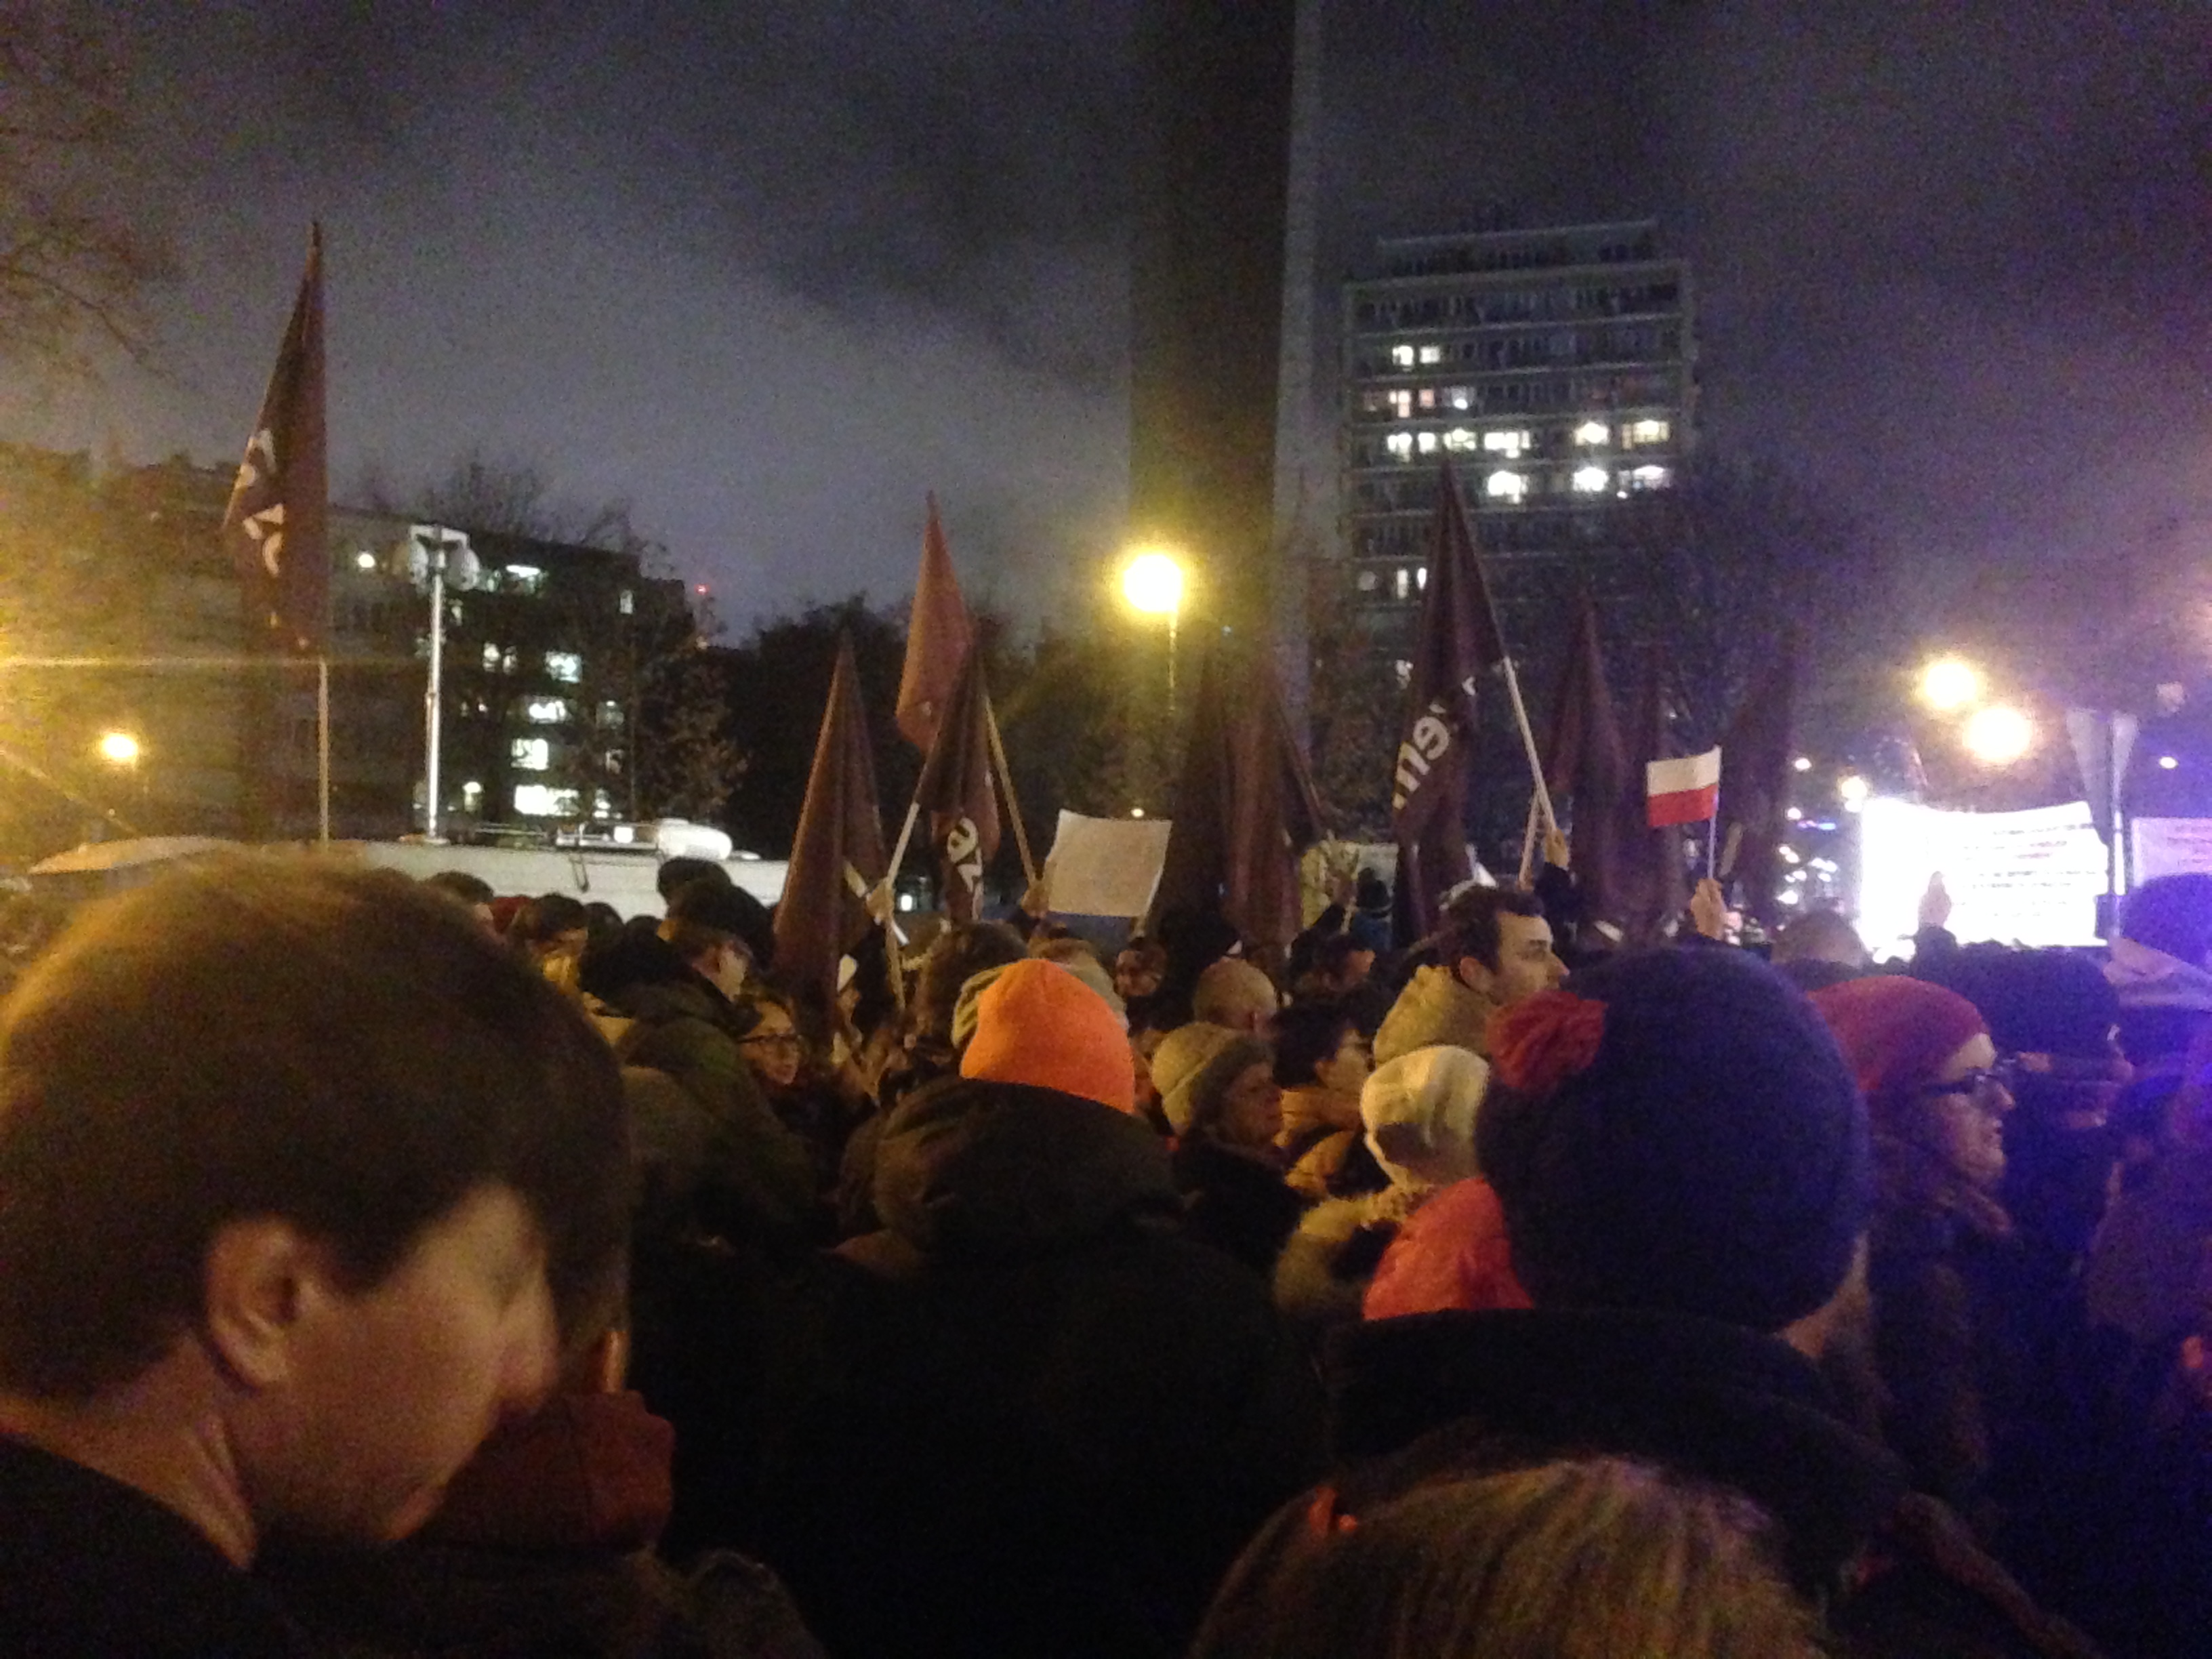 Protest in front of the Parliament building. December 2nd 2015, Photo by Anna Gotowska CC 2.0